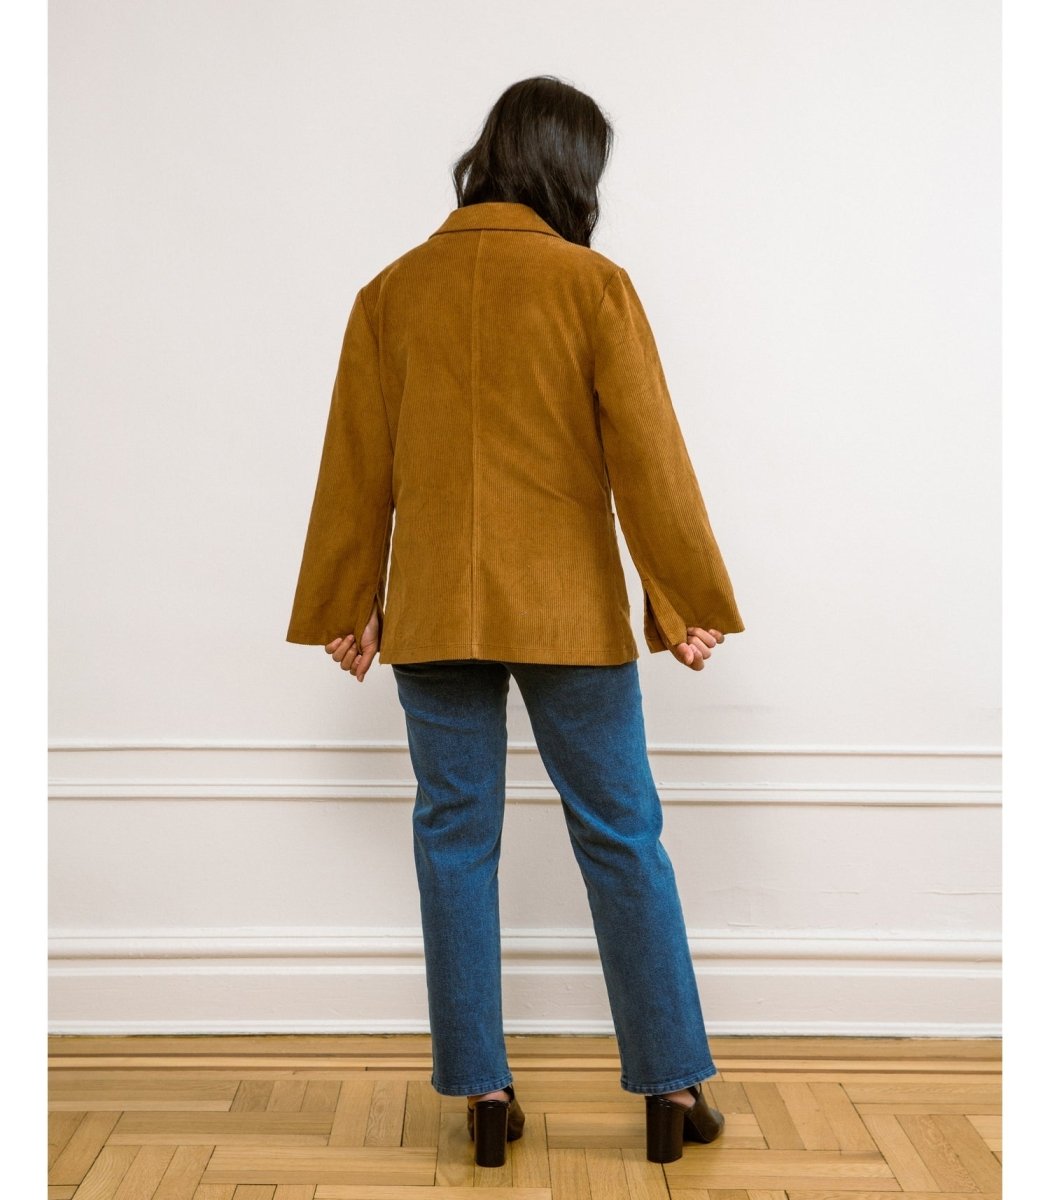 A model shows the backside of a tan corduroy jacket and wide sleeves. The Angelica Jacket in Chestnut Cord is designed from Loup and made in New York City, USA.